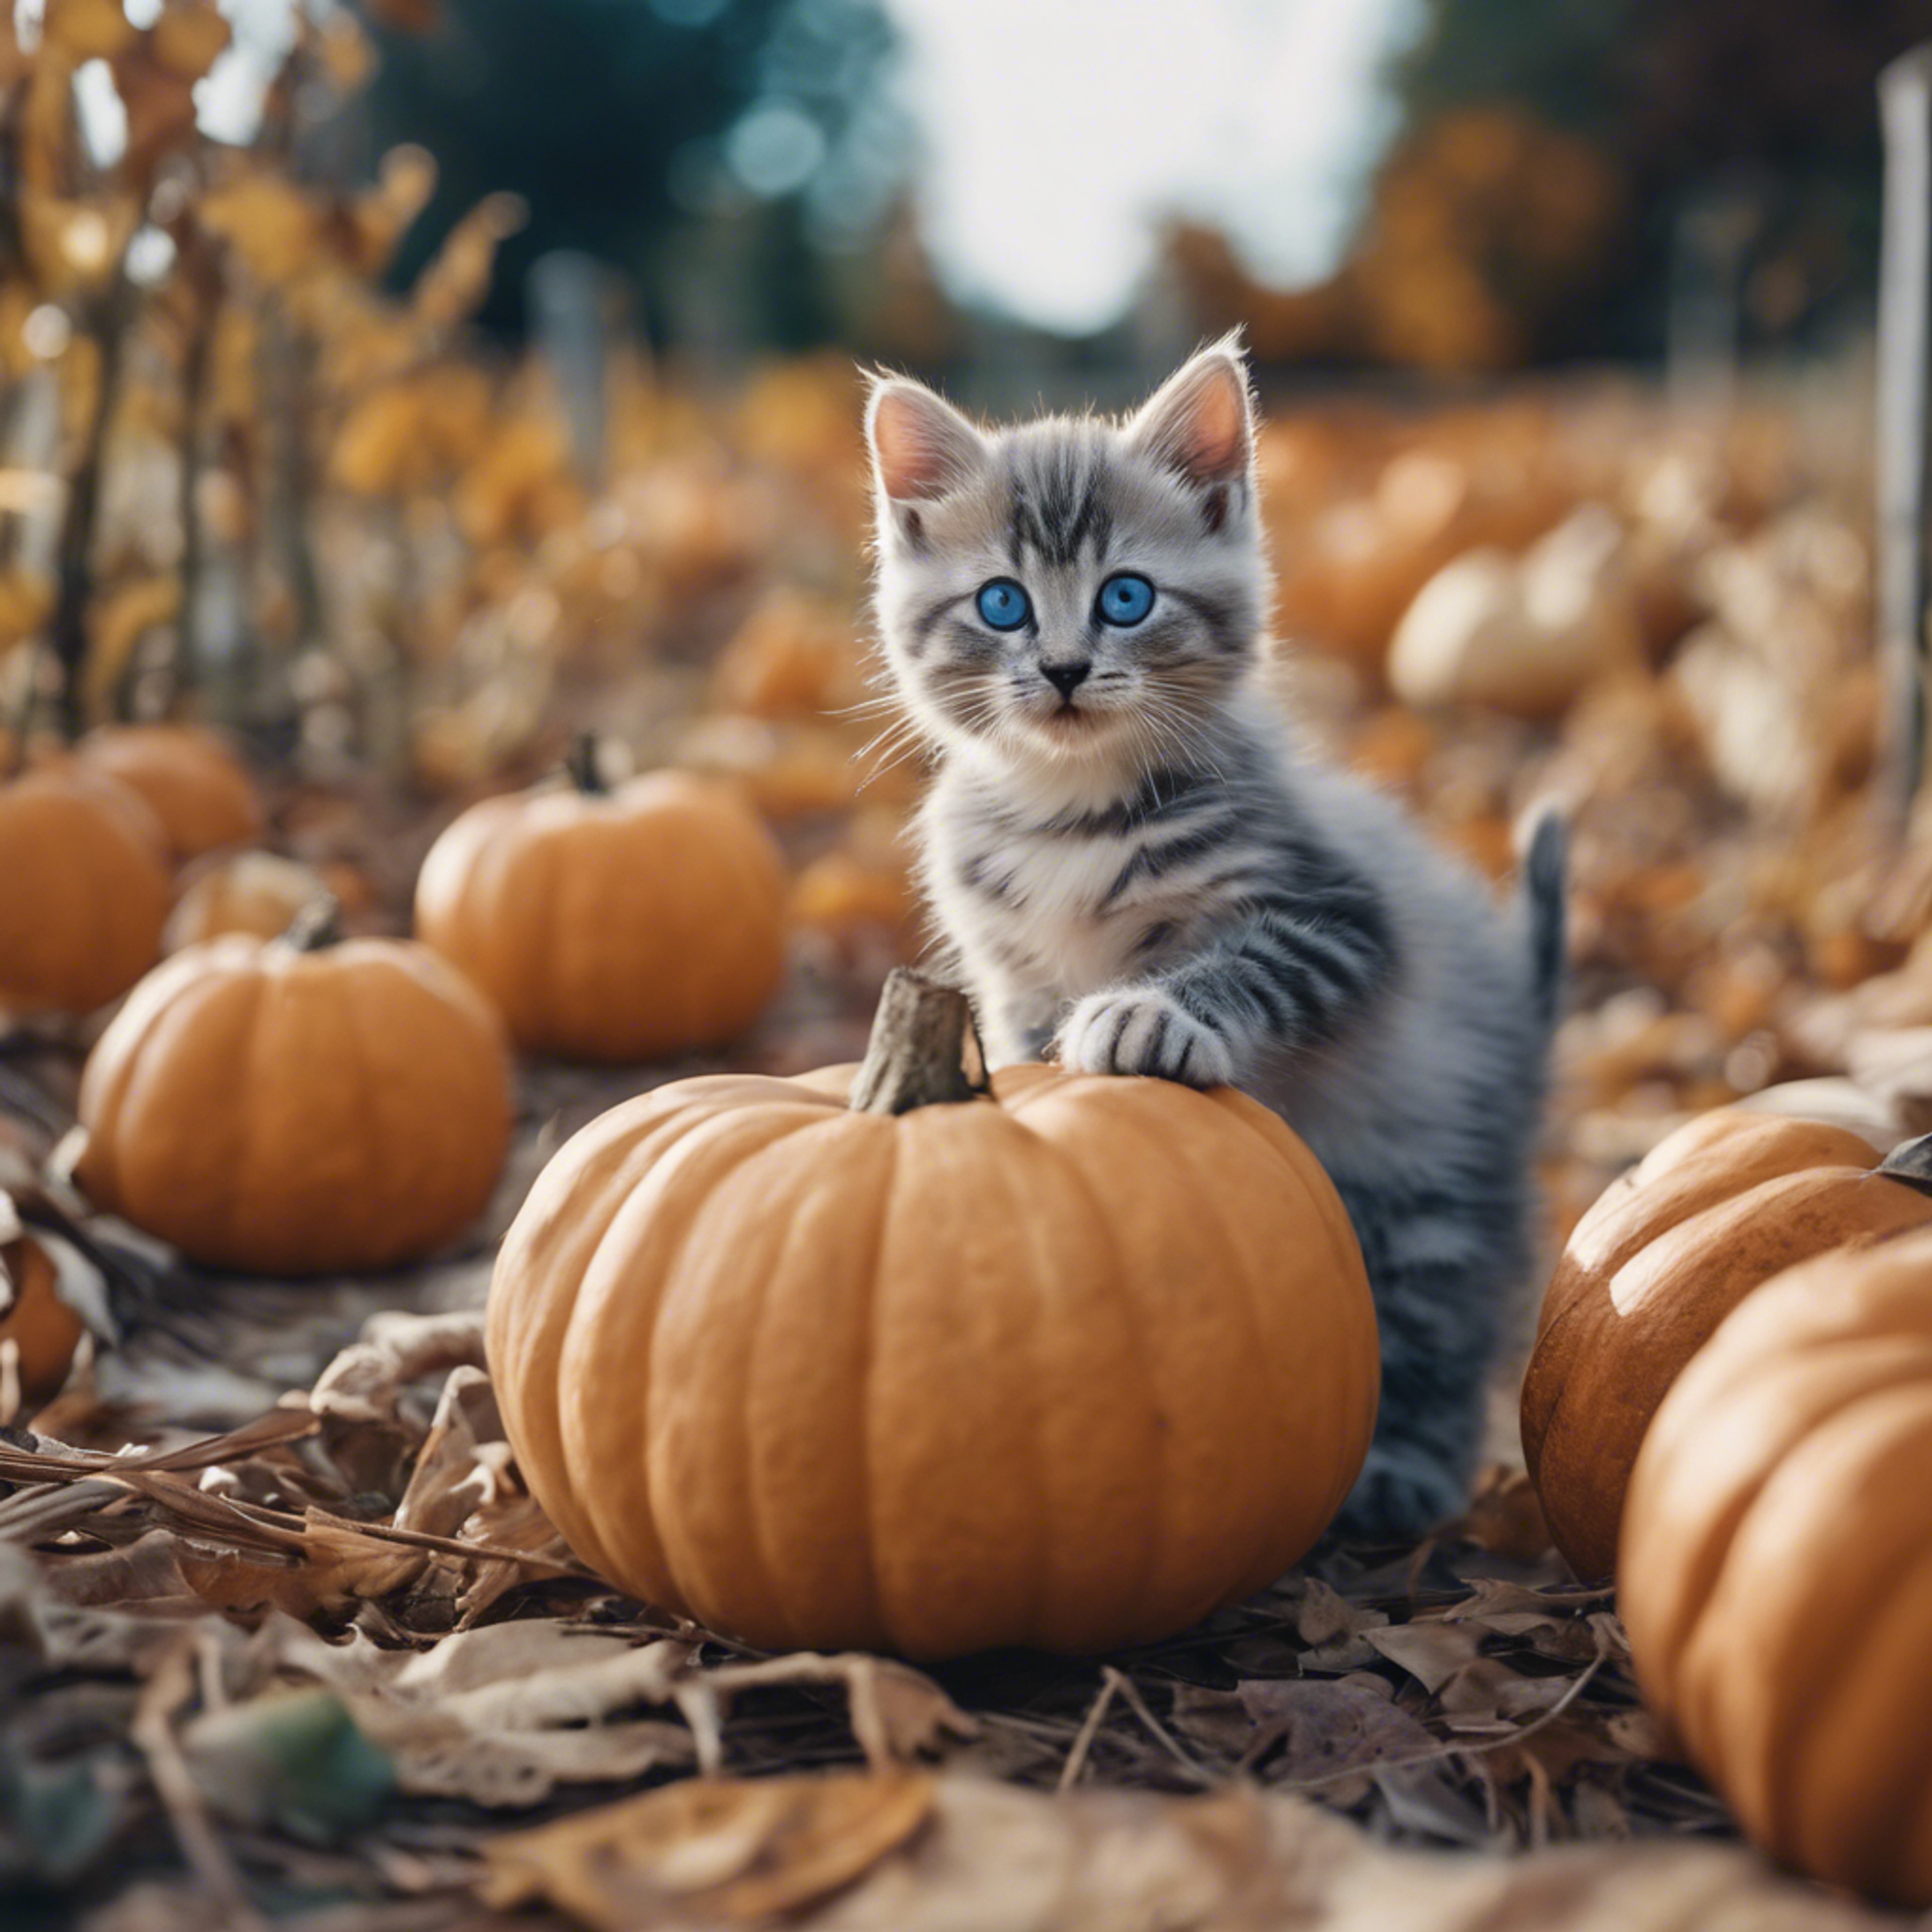 A small blue-eyed Cheetoh kitten exploring a pumpkin patch on an invitingly cool fall day. Tapetai[ee8fc80847a940e288a7]